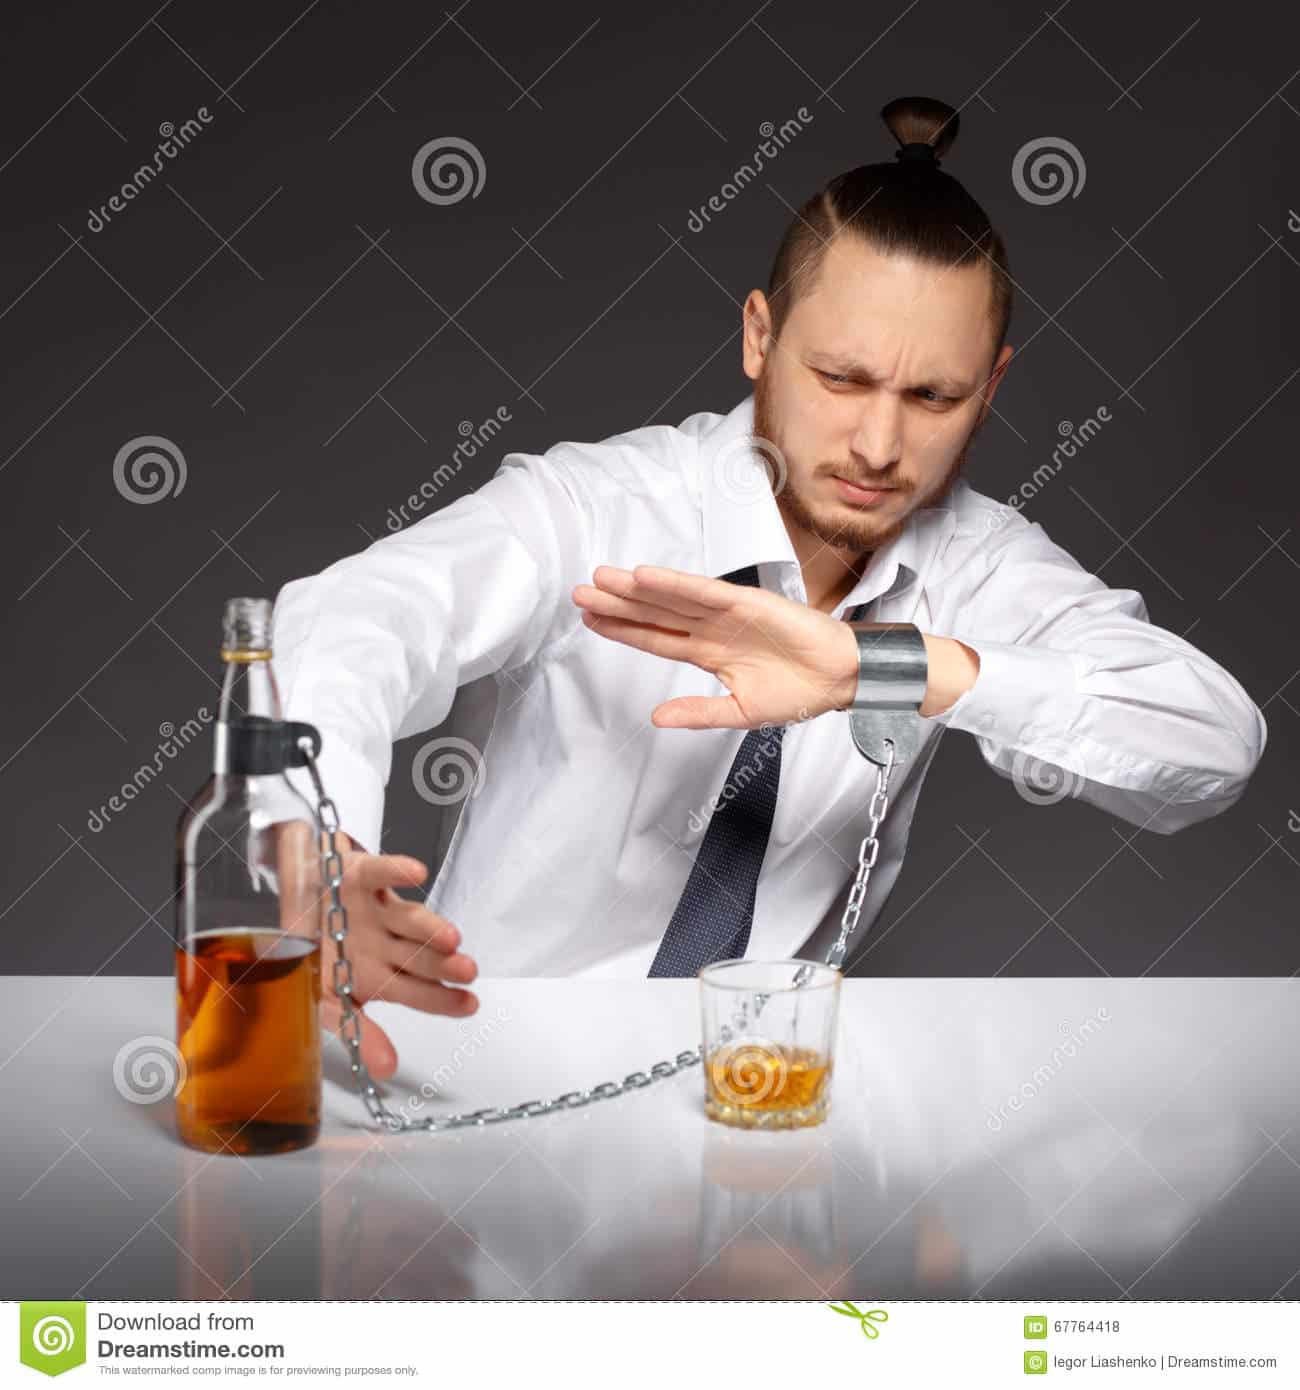 Alcohol dependence in men stock photo. Image of businessman